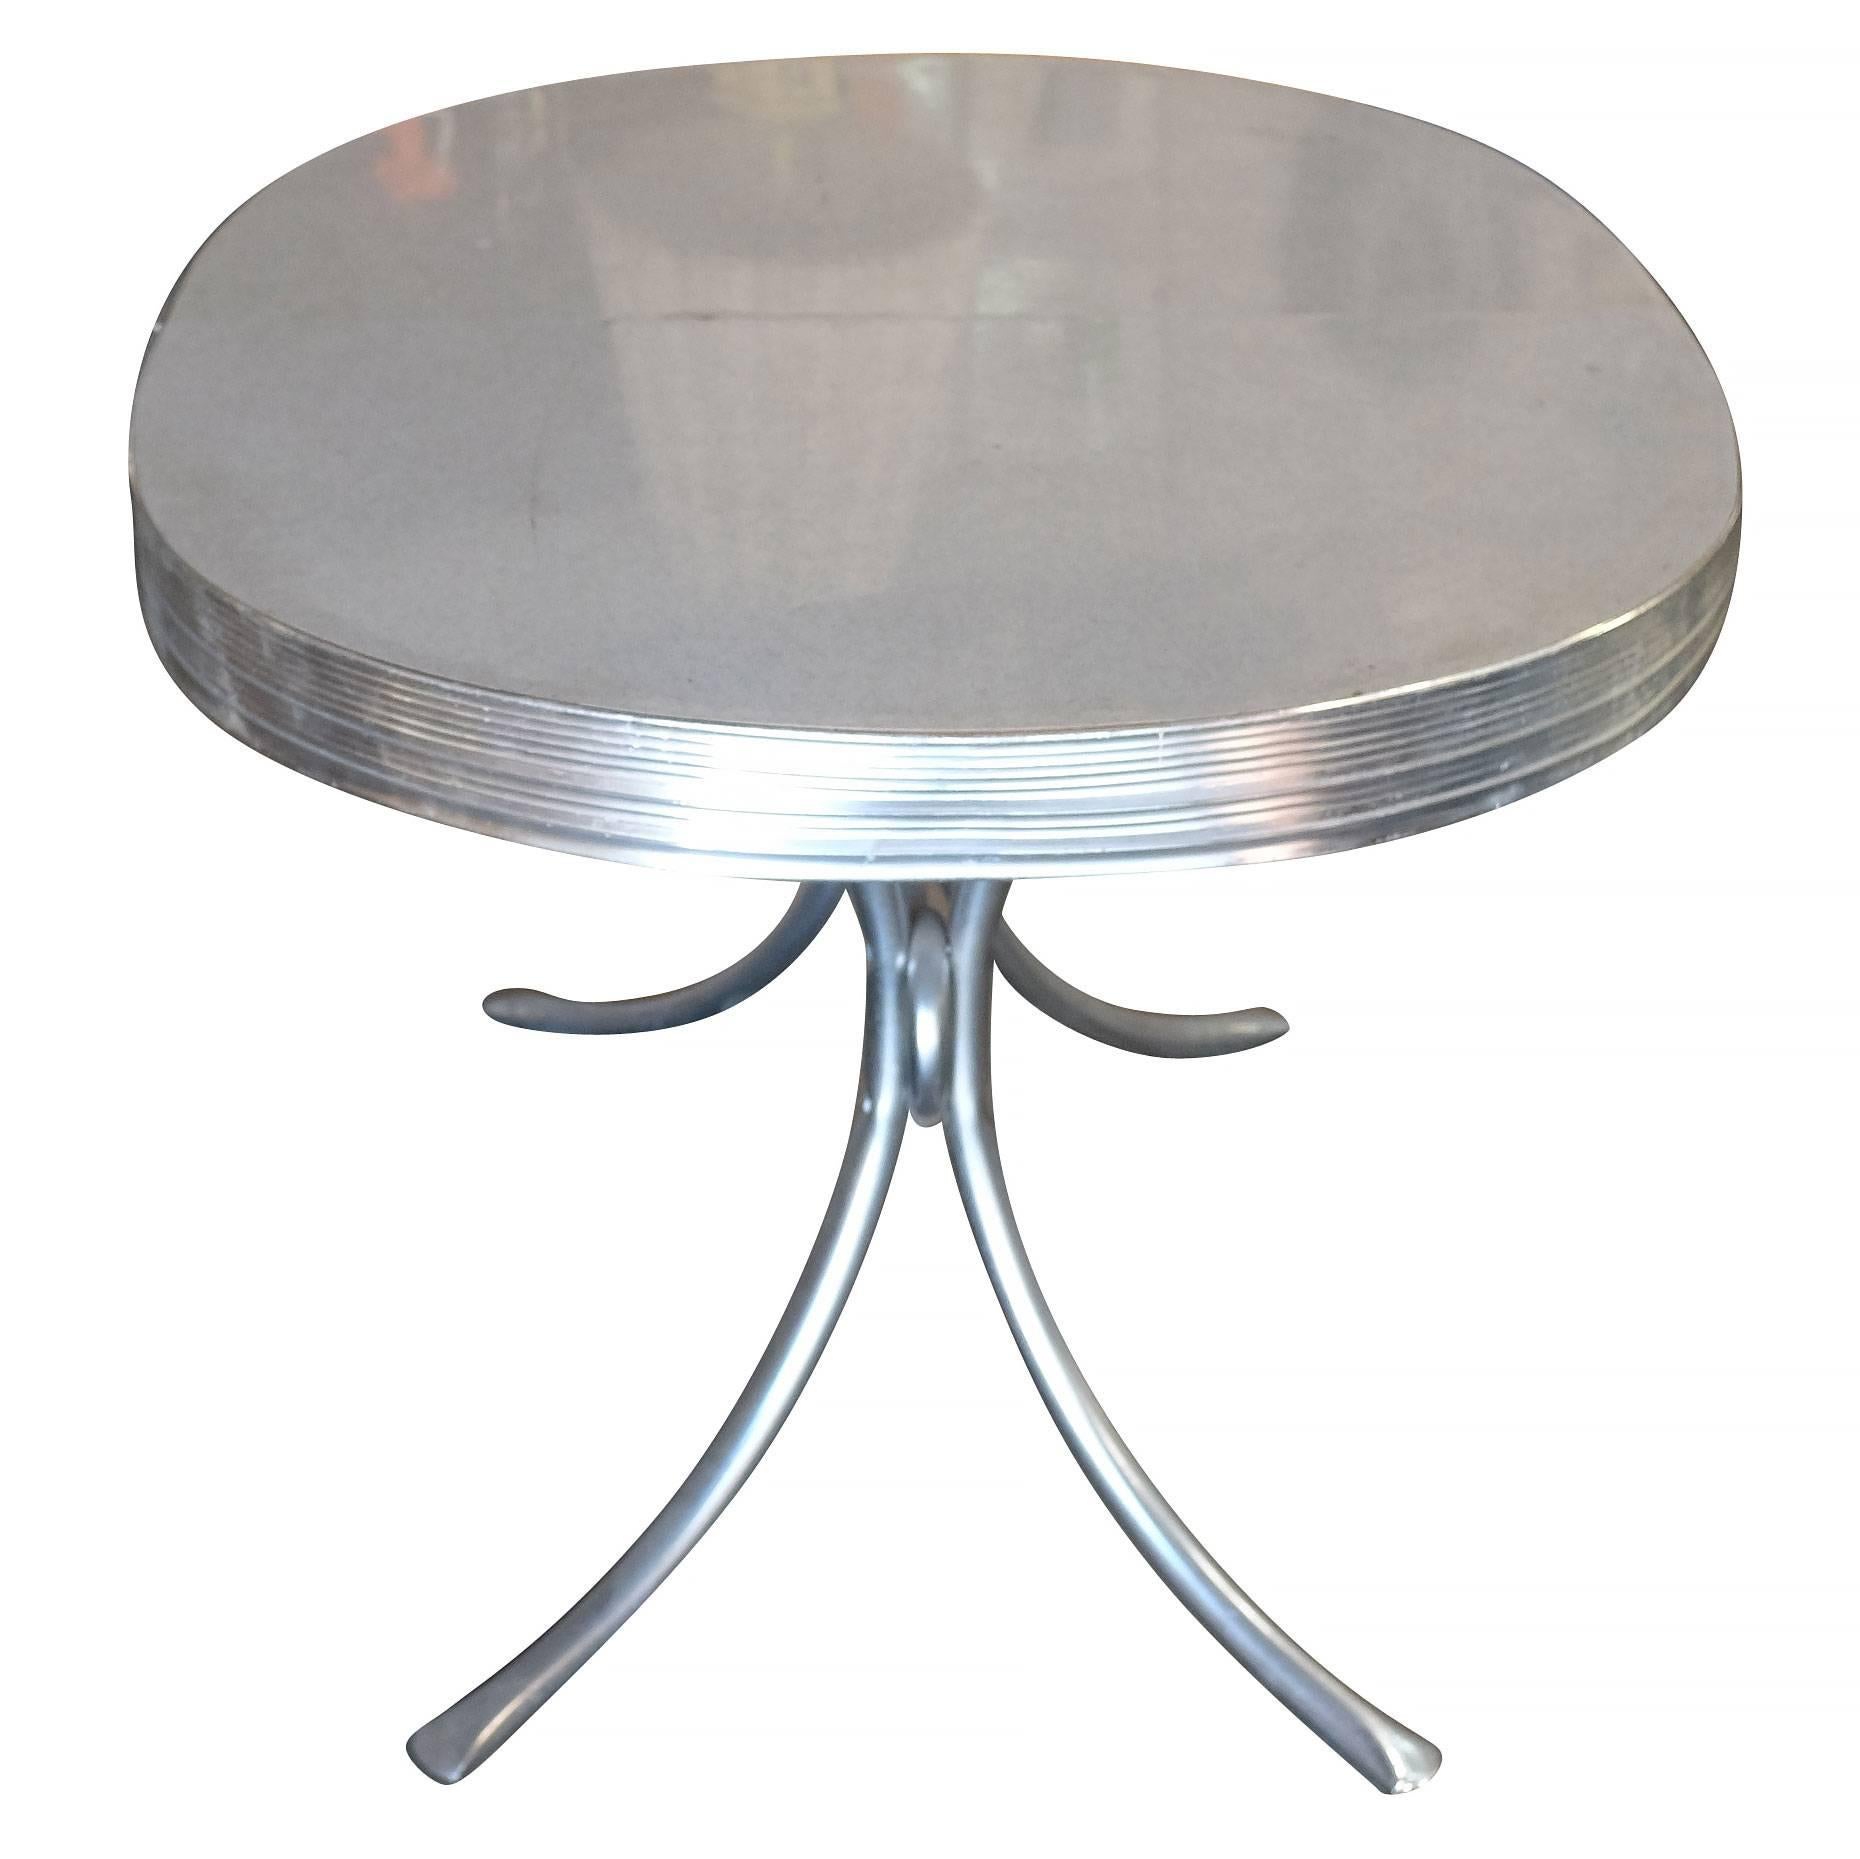 Midcentury white oval Formica kitchen table with chrome round tubular Legs.